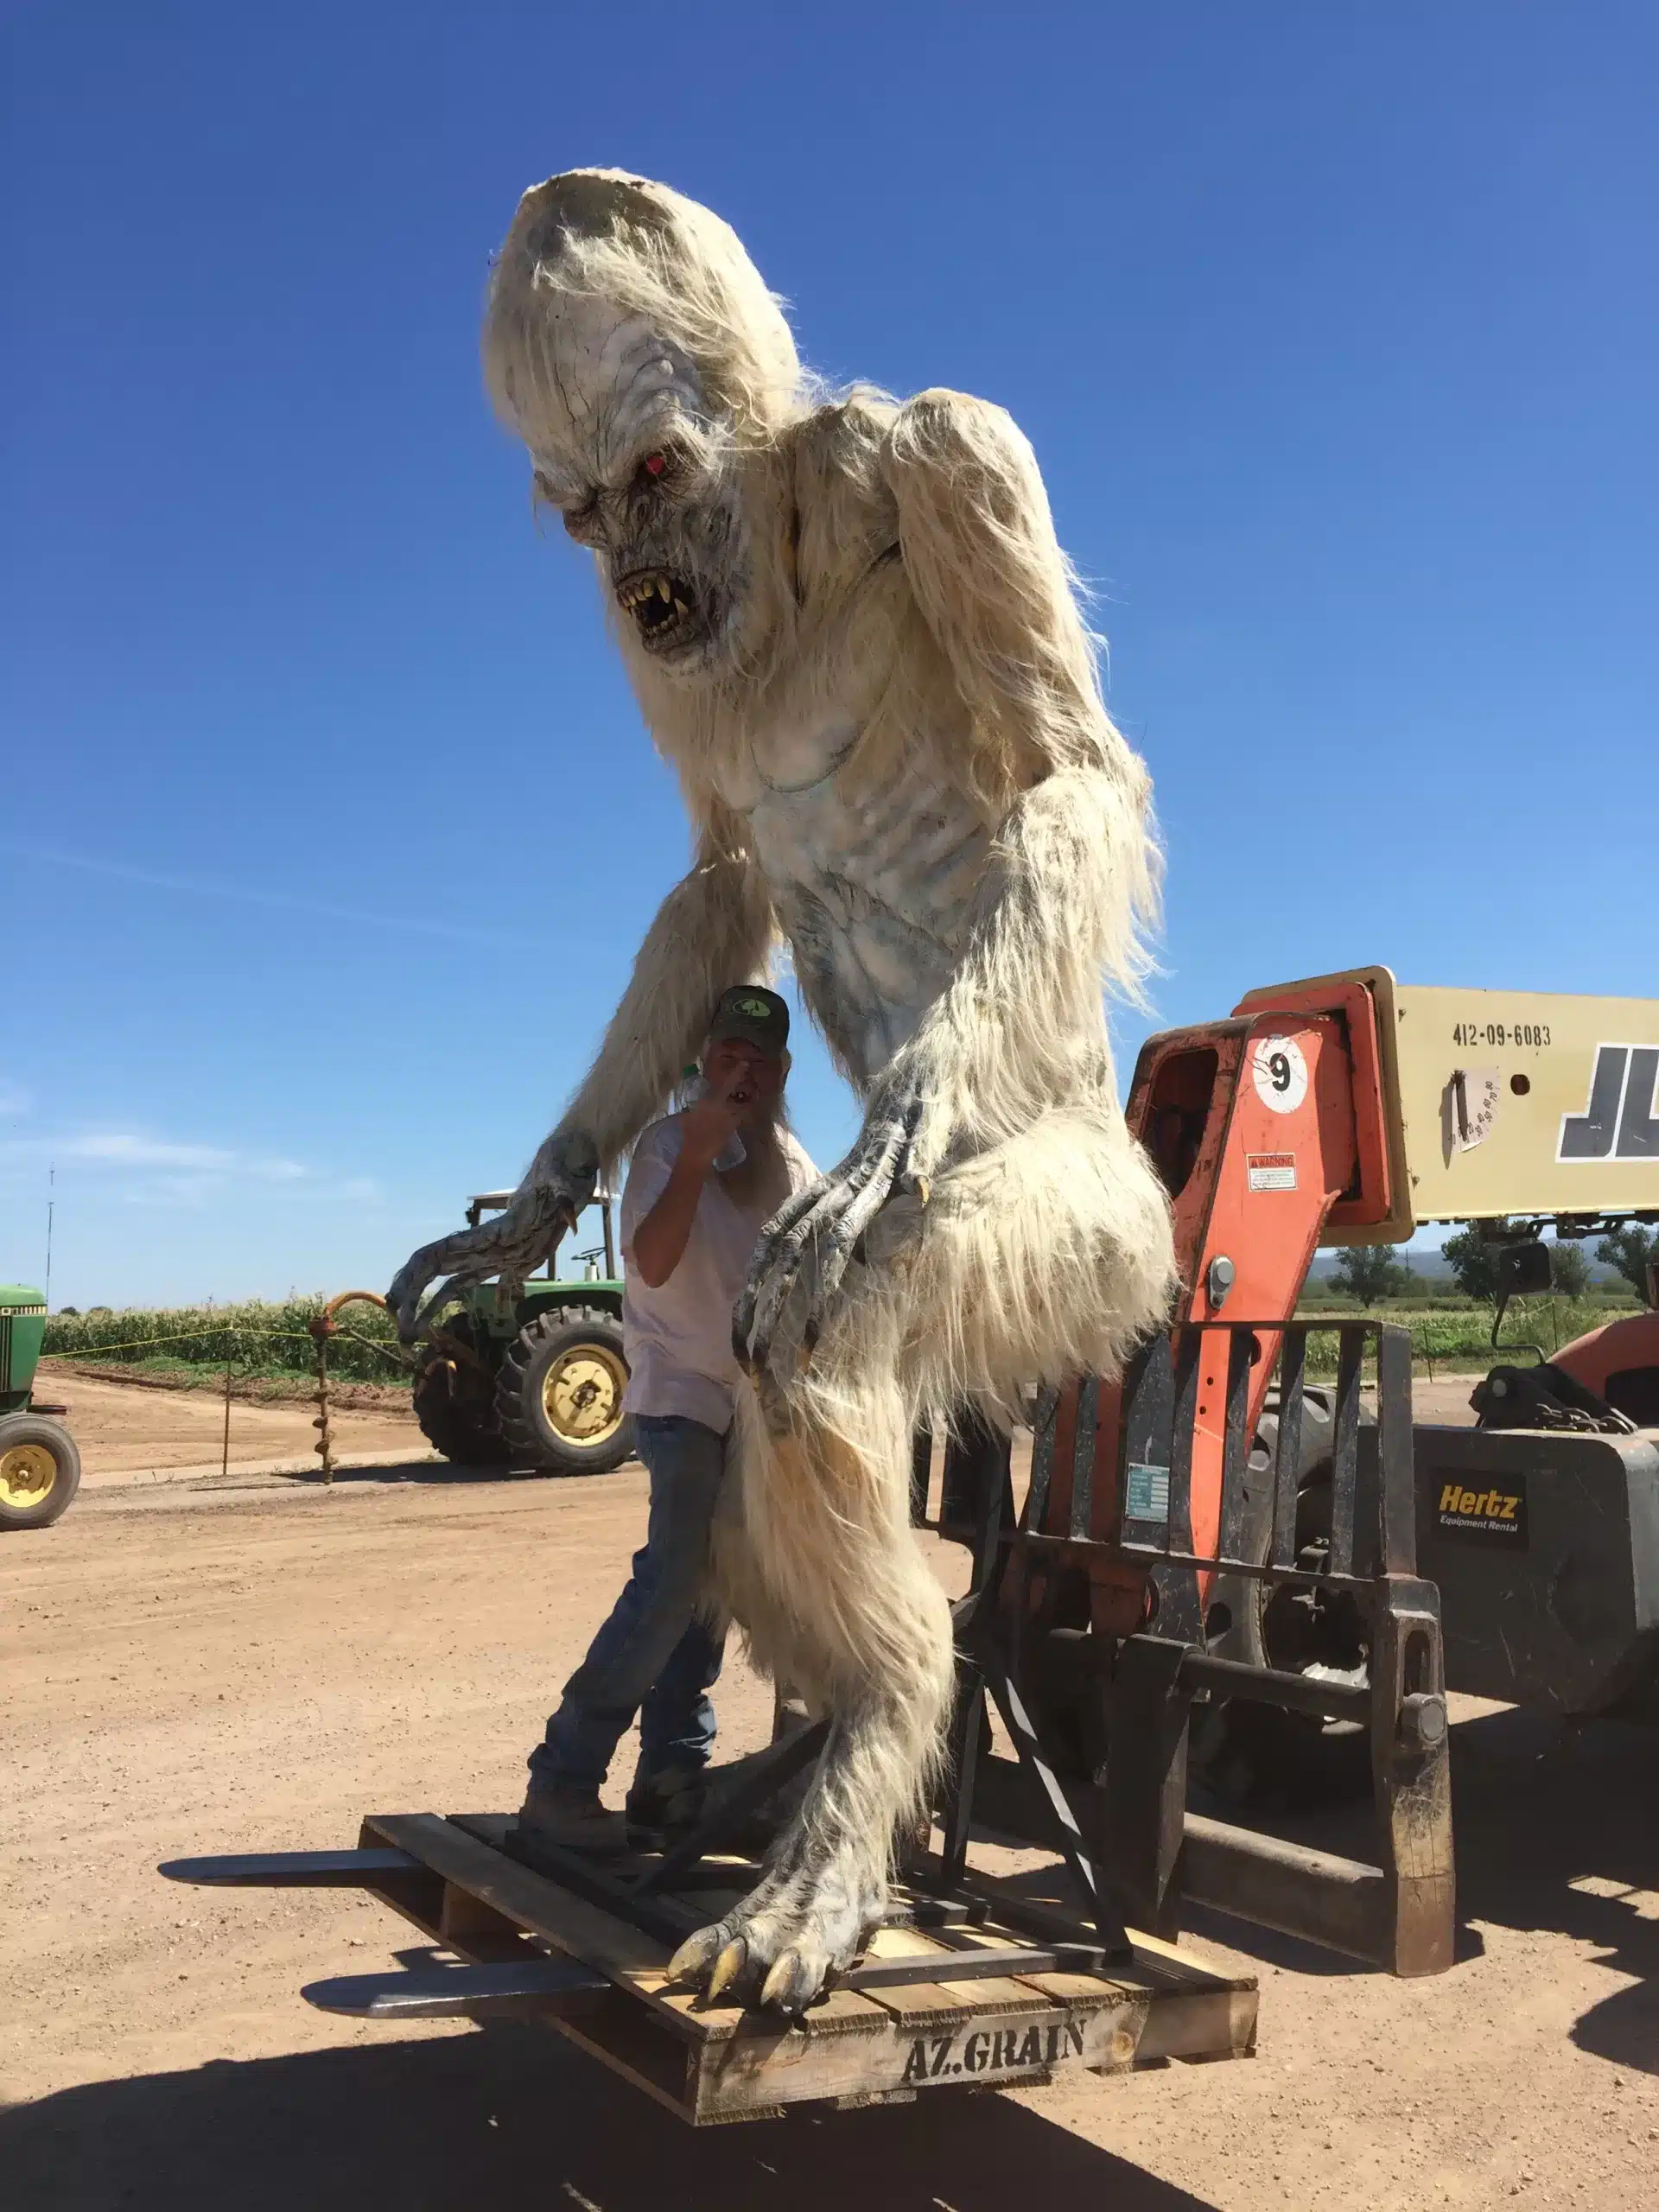 Large Yeti Statue being Moved on Tractor at Terror in the Corn